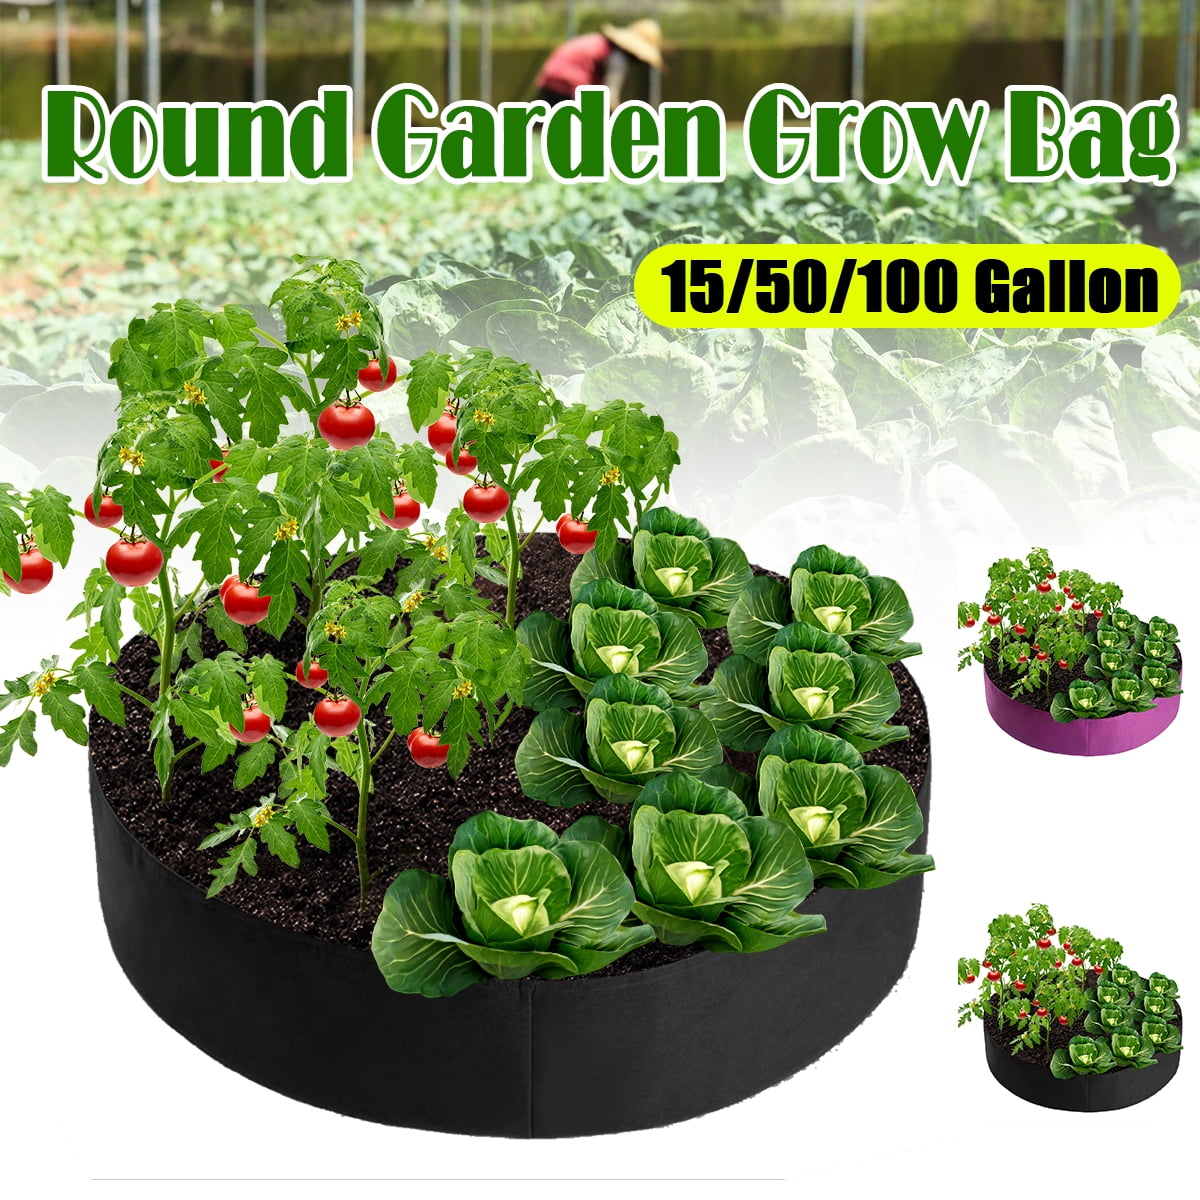 Makes Gardening Easy for Everyone! Vegetables and Flowers 100 Gallon Grow Bag for Fruits TerraBag Fabric Raised Garden Bed 